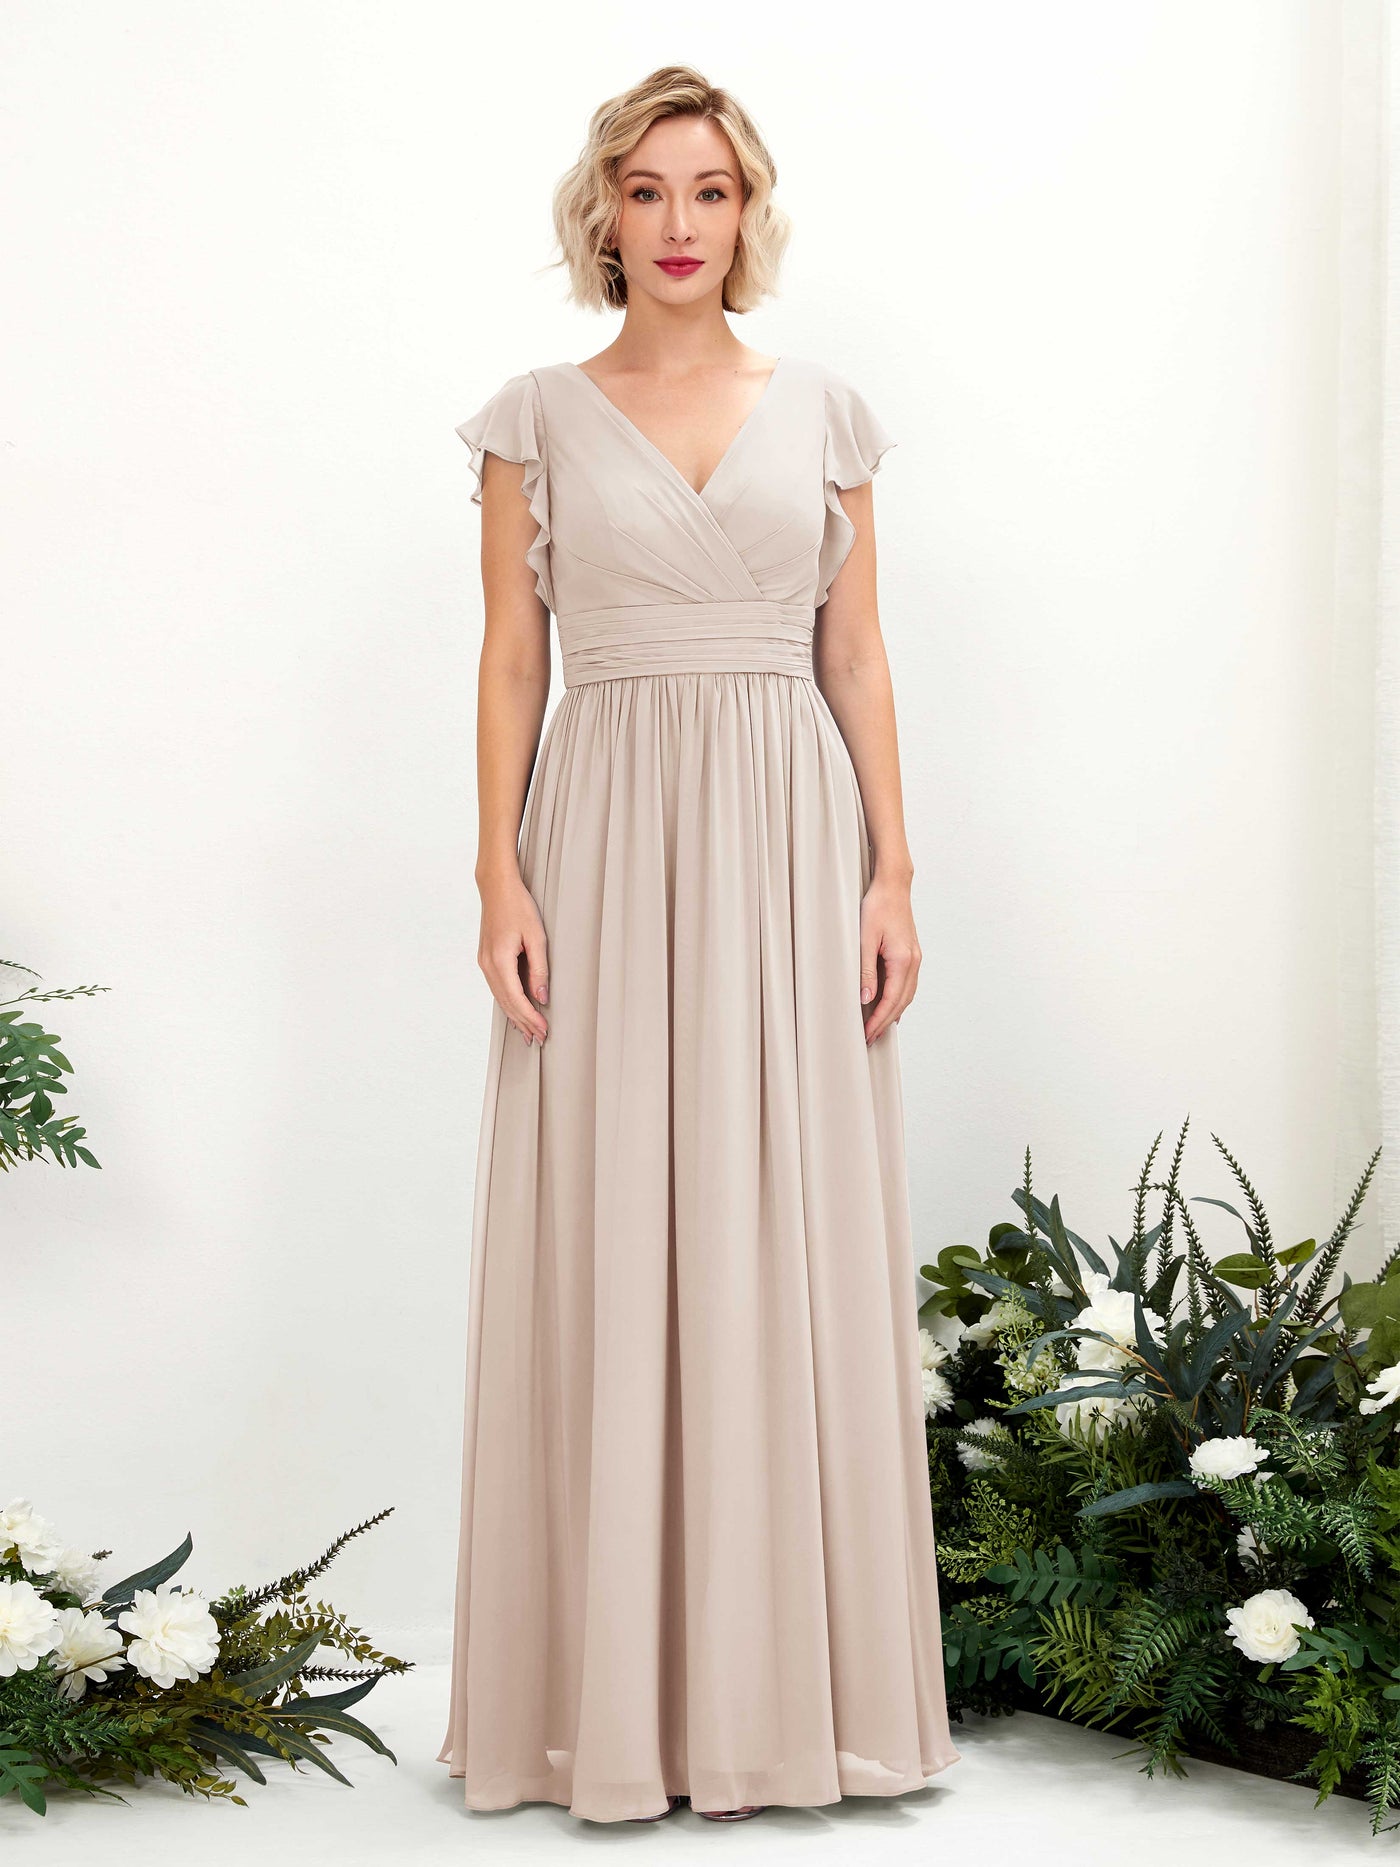 Champagne Bridesmaid Dresses Bridesmaid Dress A-line Chiffon V-neck Full Length Short Sleeves Wedding Party Dress (81222716)#color_champagne